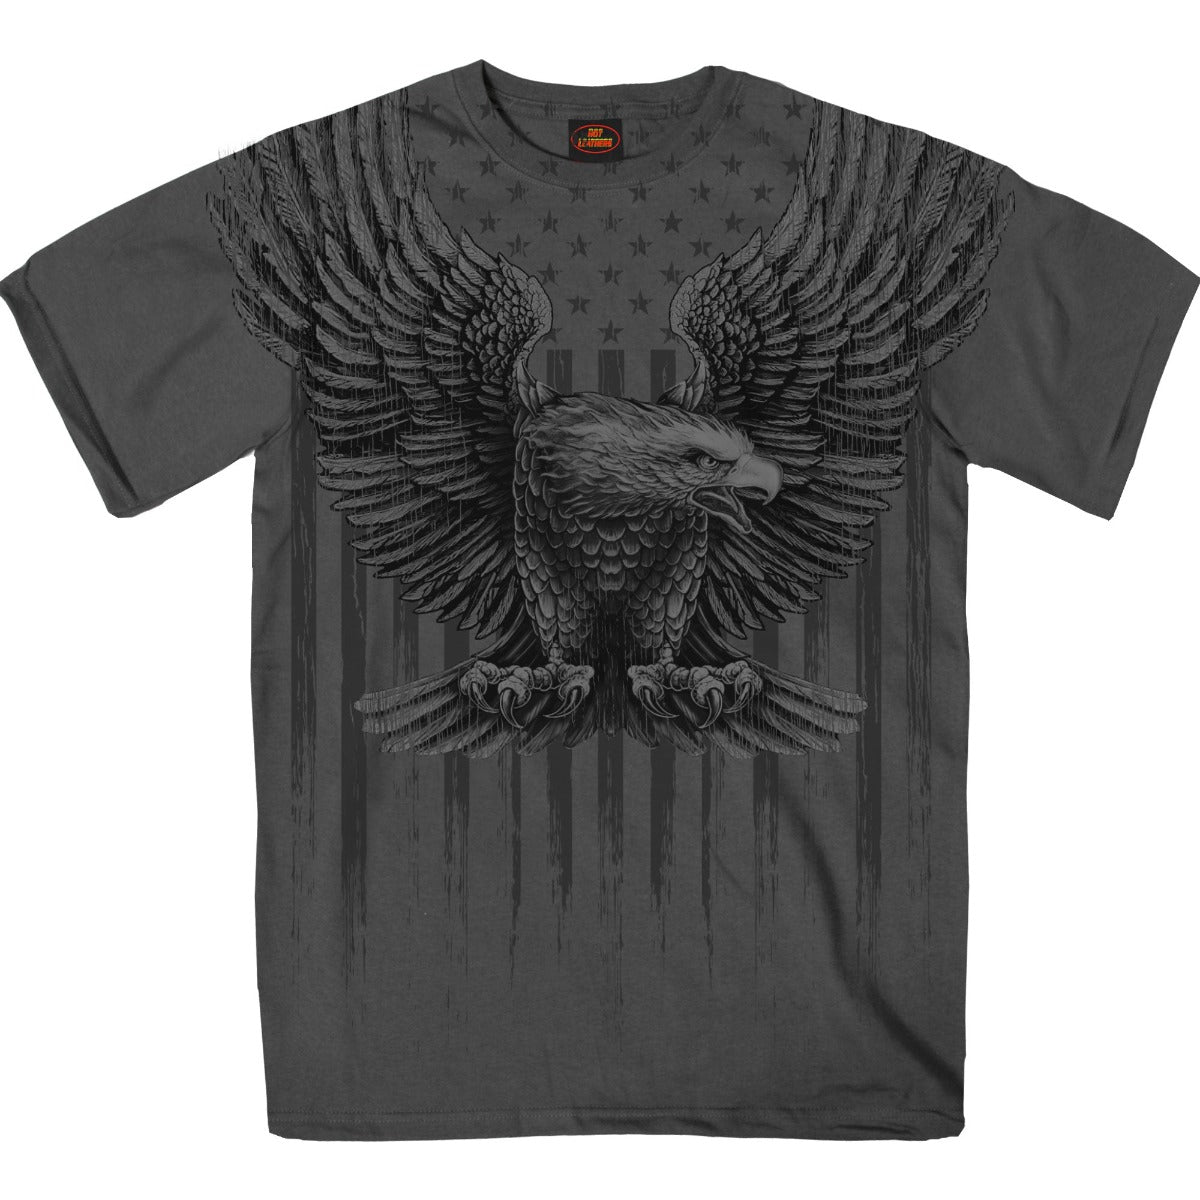 Hot Leathers Men’s Charcoal Short Sleeved Up-Wing Eagle T-Shirt